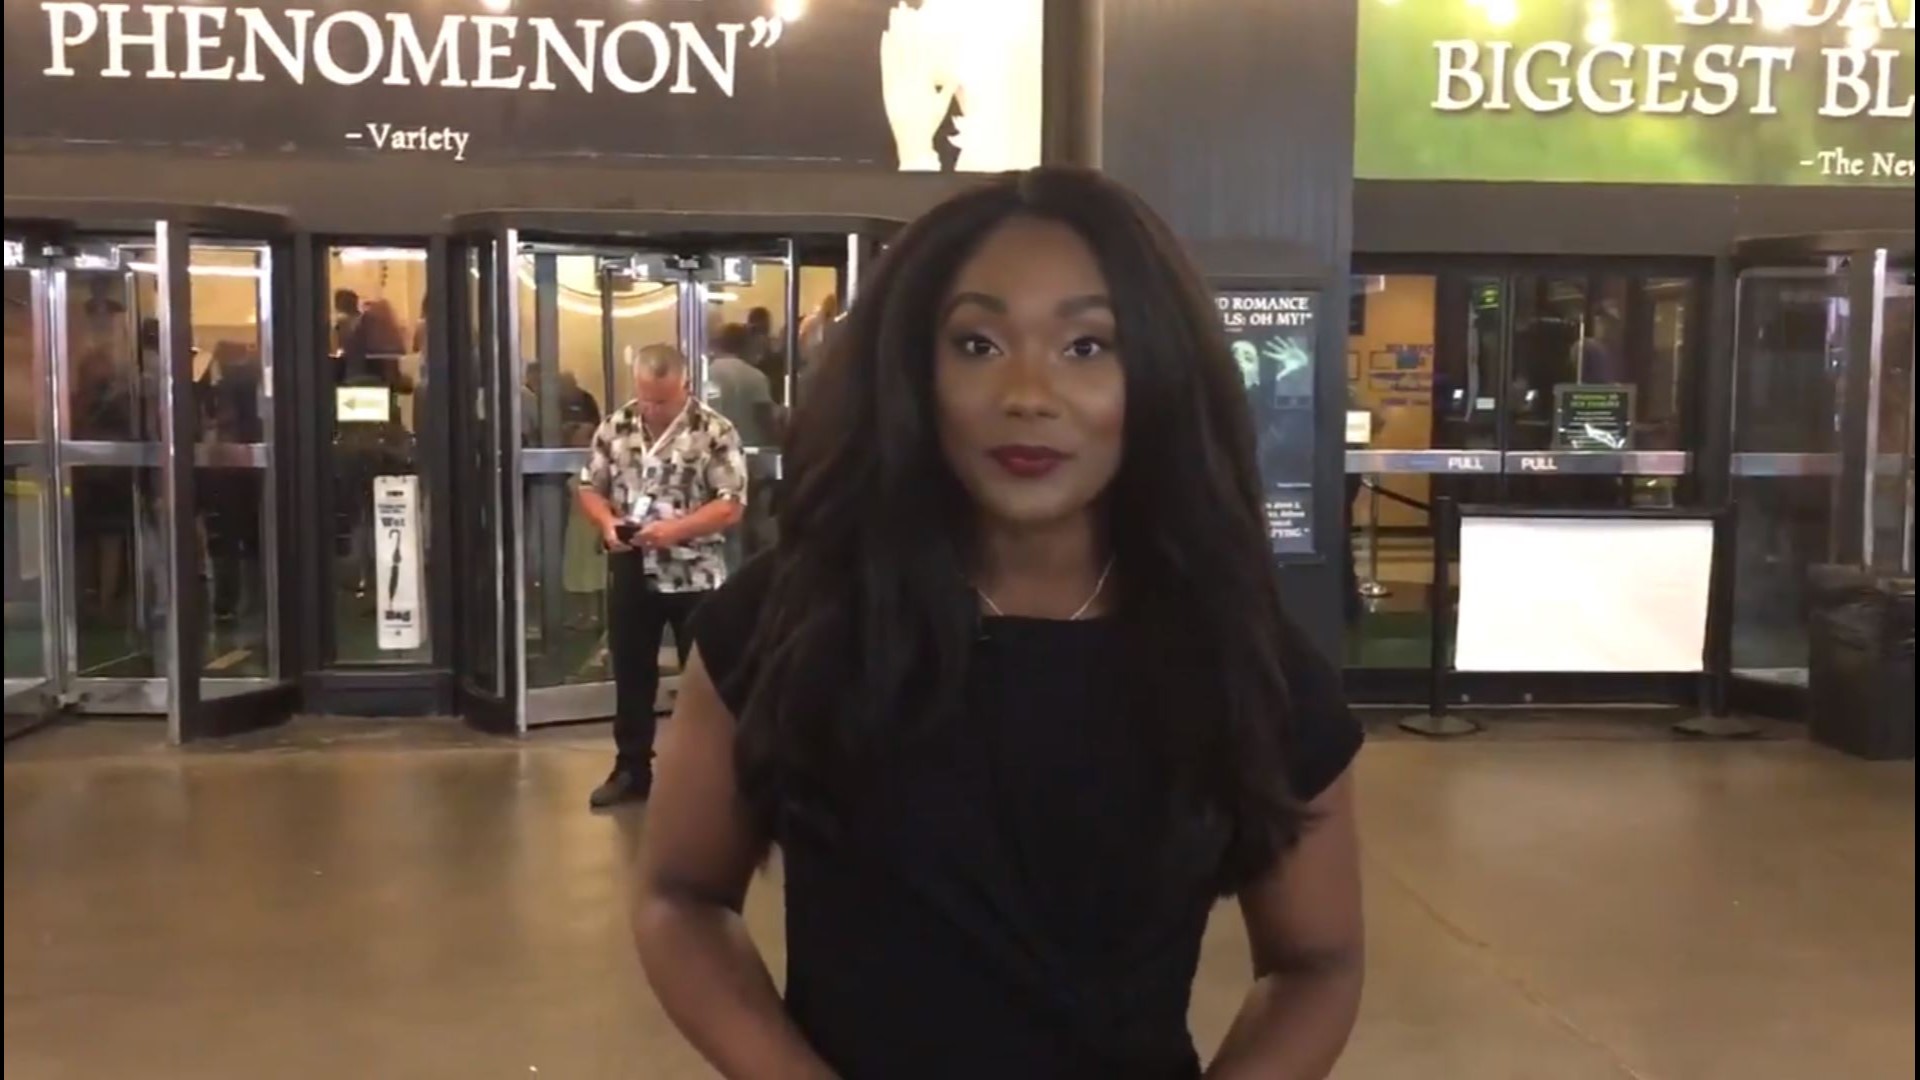 Believe it or not, we're just months away from the opening of the Steven Tanger Center for Performing Arts in Greensboro. WFMY News 2's Taheshah Moise went to Broadway to see 'Wicked,' other plays to get a feel for what you can expect when they roll into the Triad!